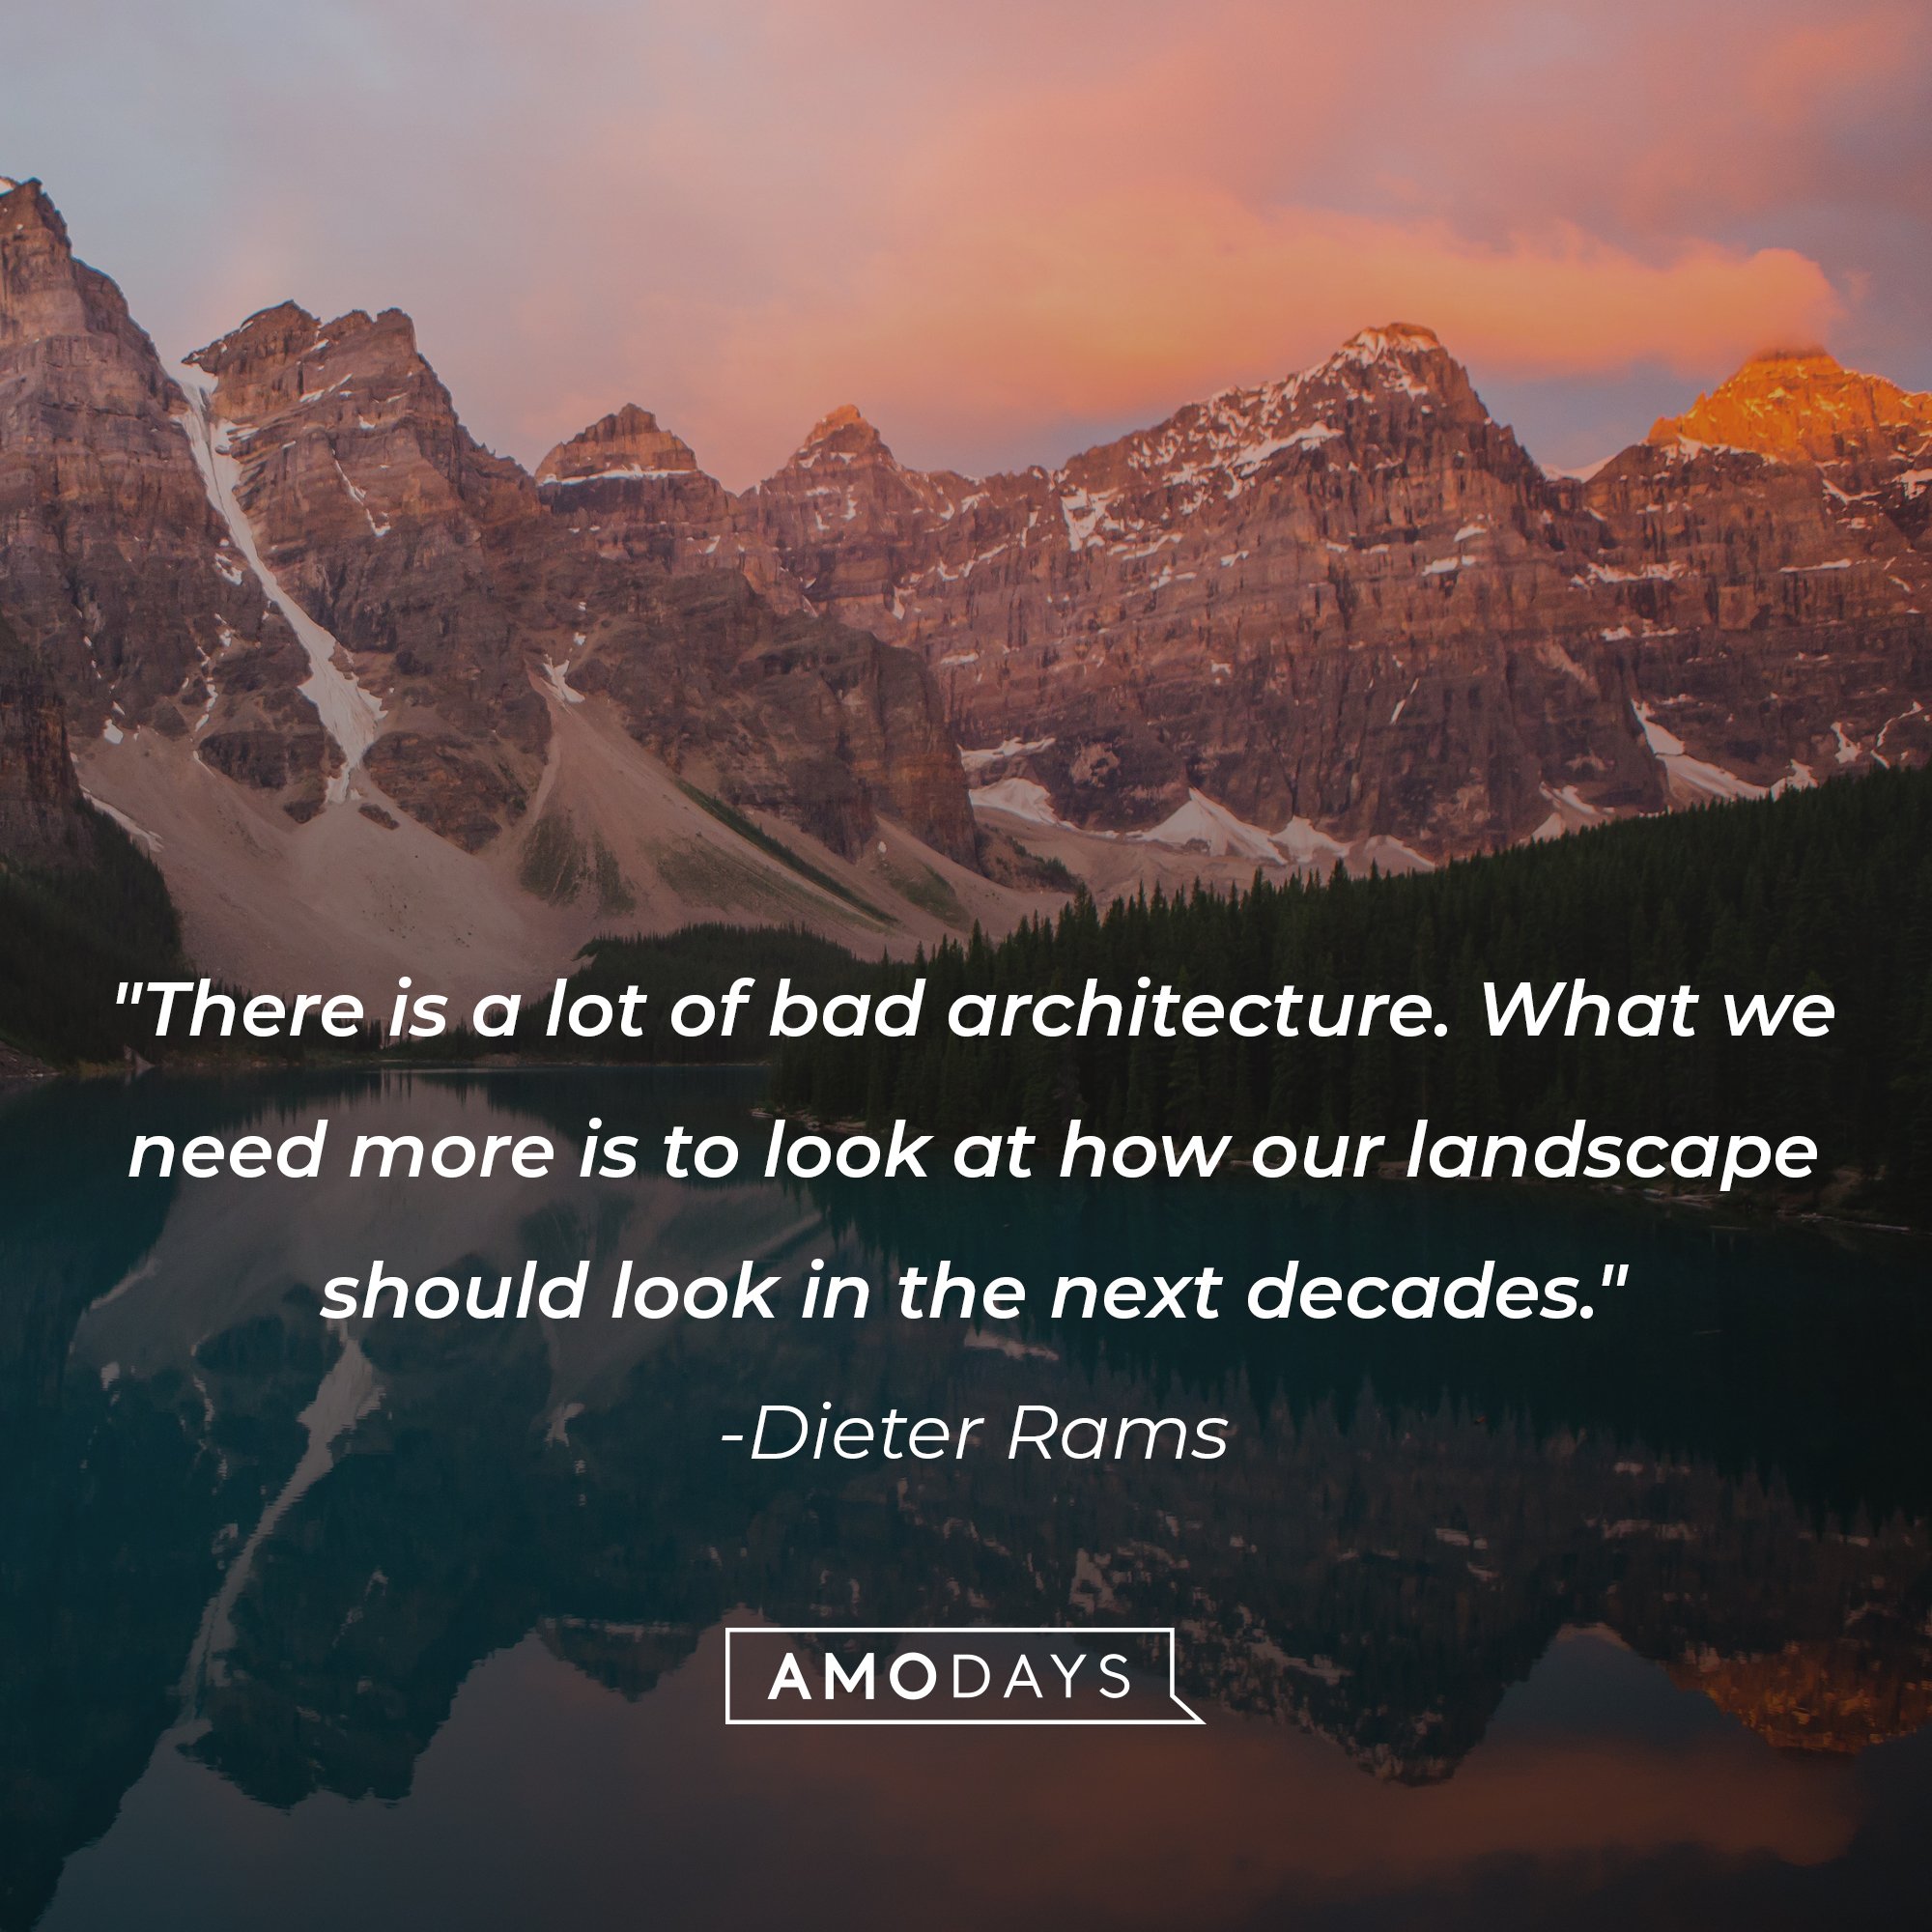 Dieter Rams' quote: "There is a lot of bad architecture. What we need more is to look at how our landscape should look in the next decades." | Image: AmoDays